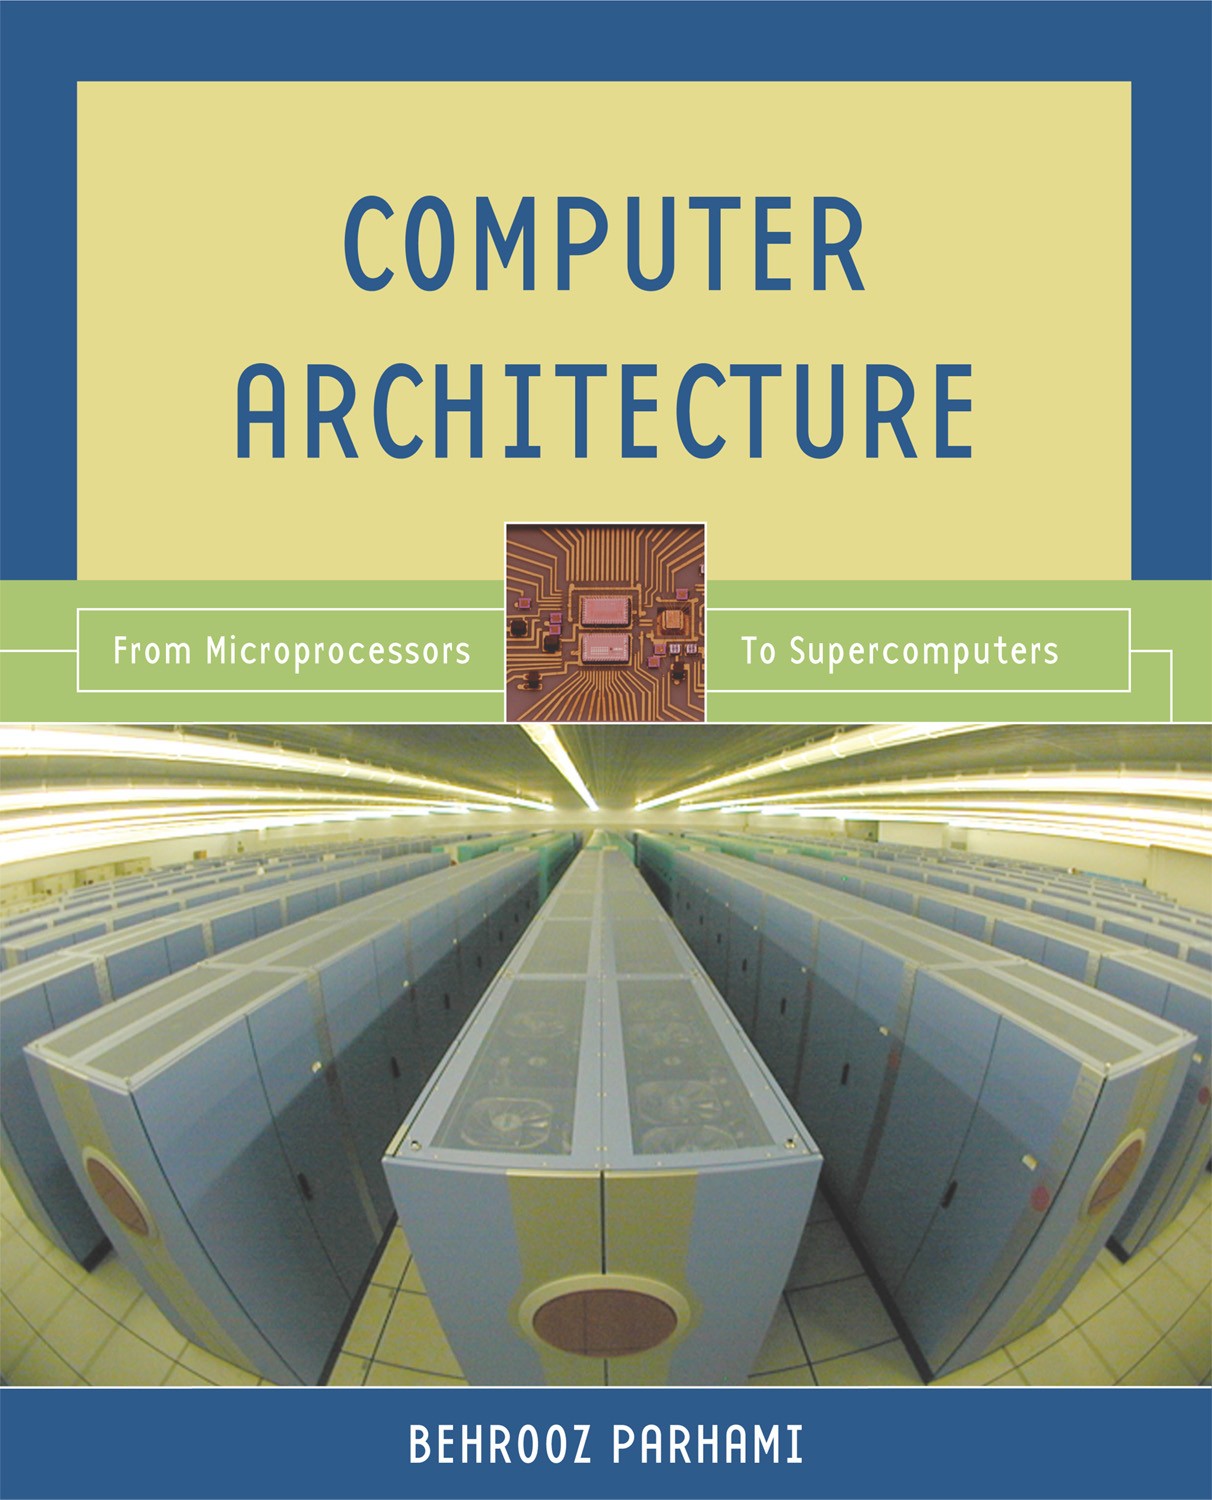 Cover of B. Parhami's computer architecture textbook